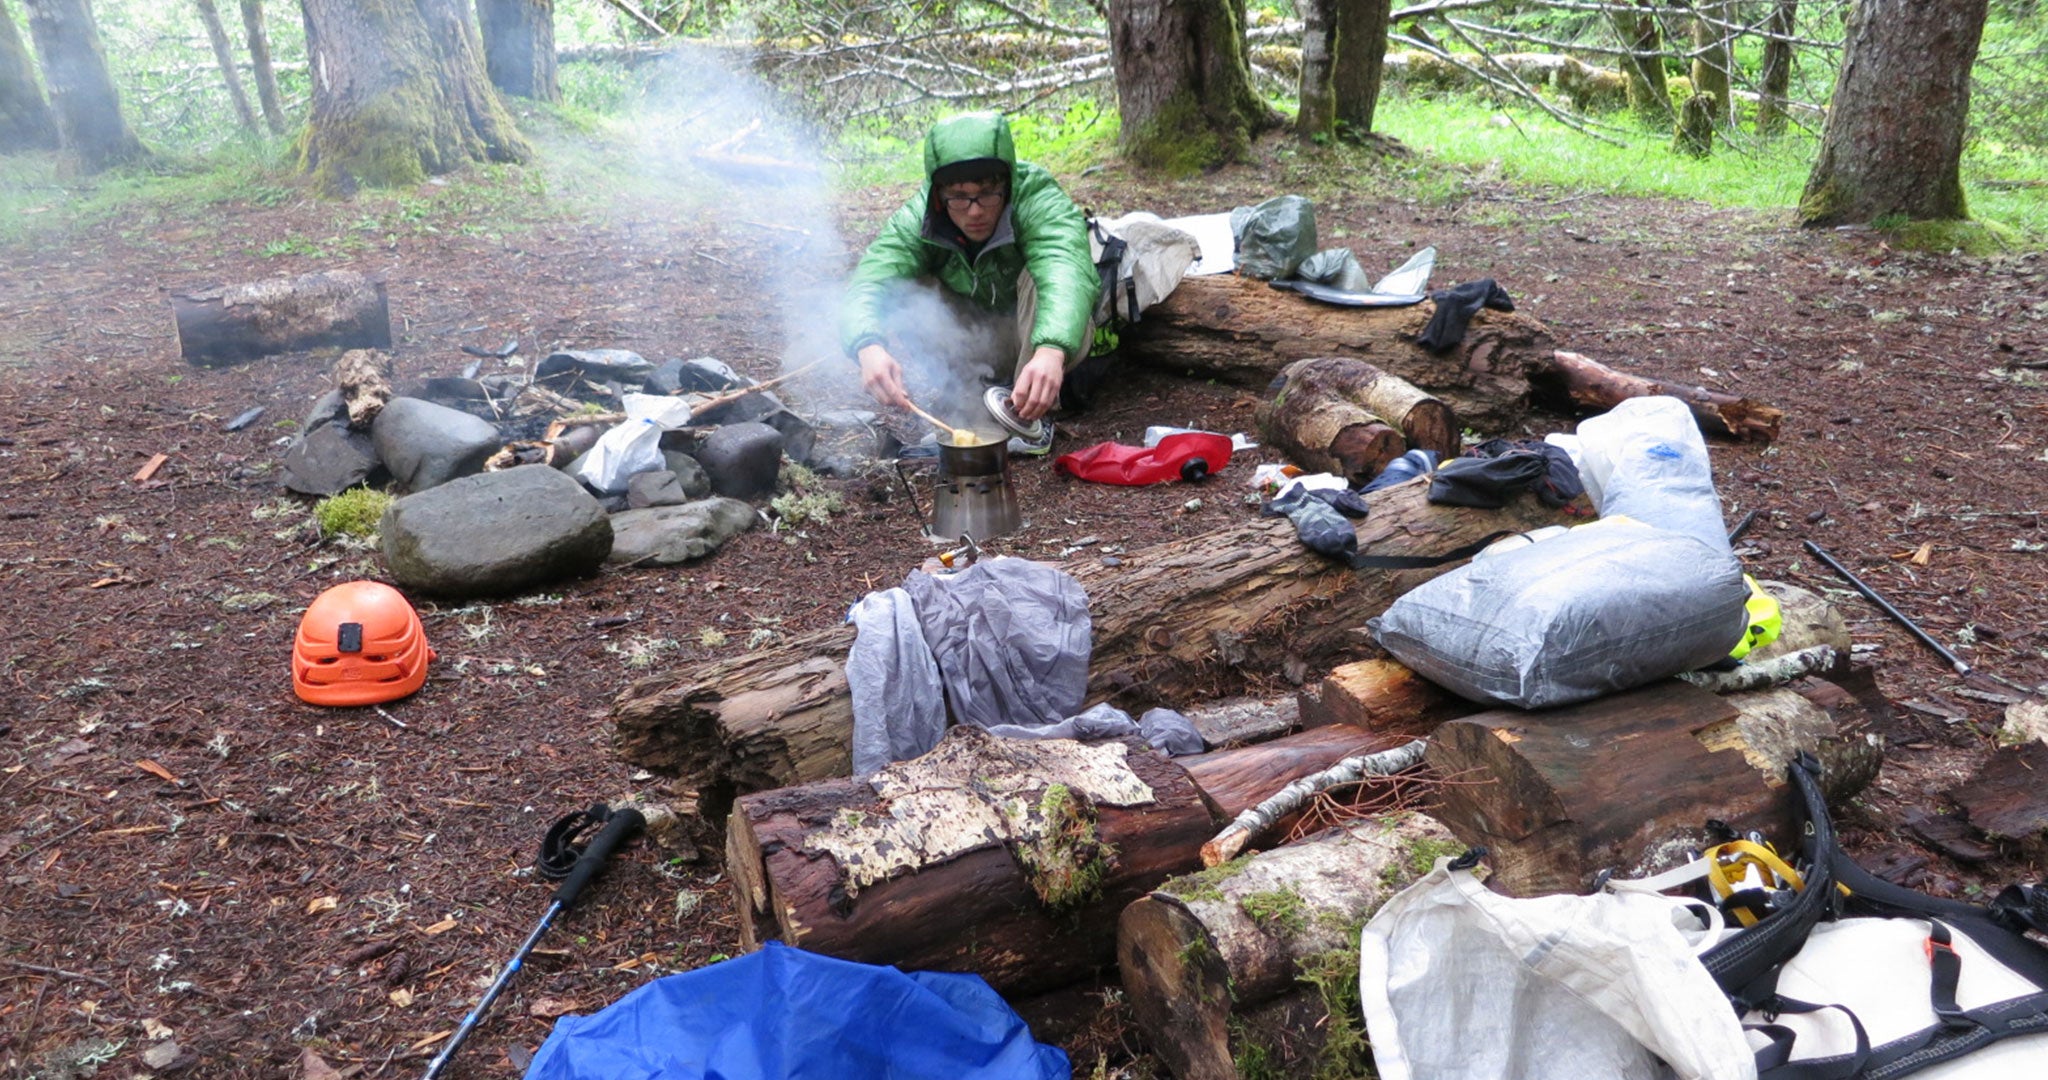 Backcountry Cooking